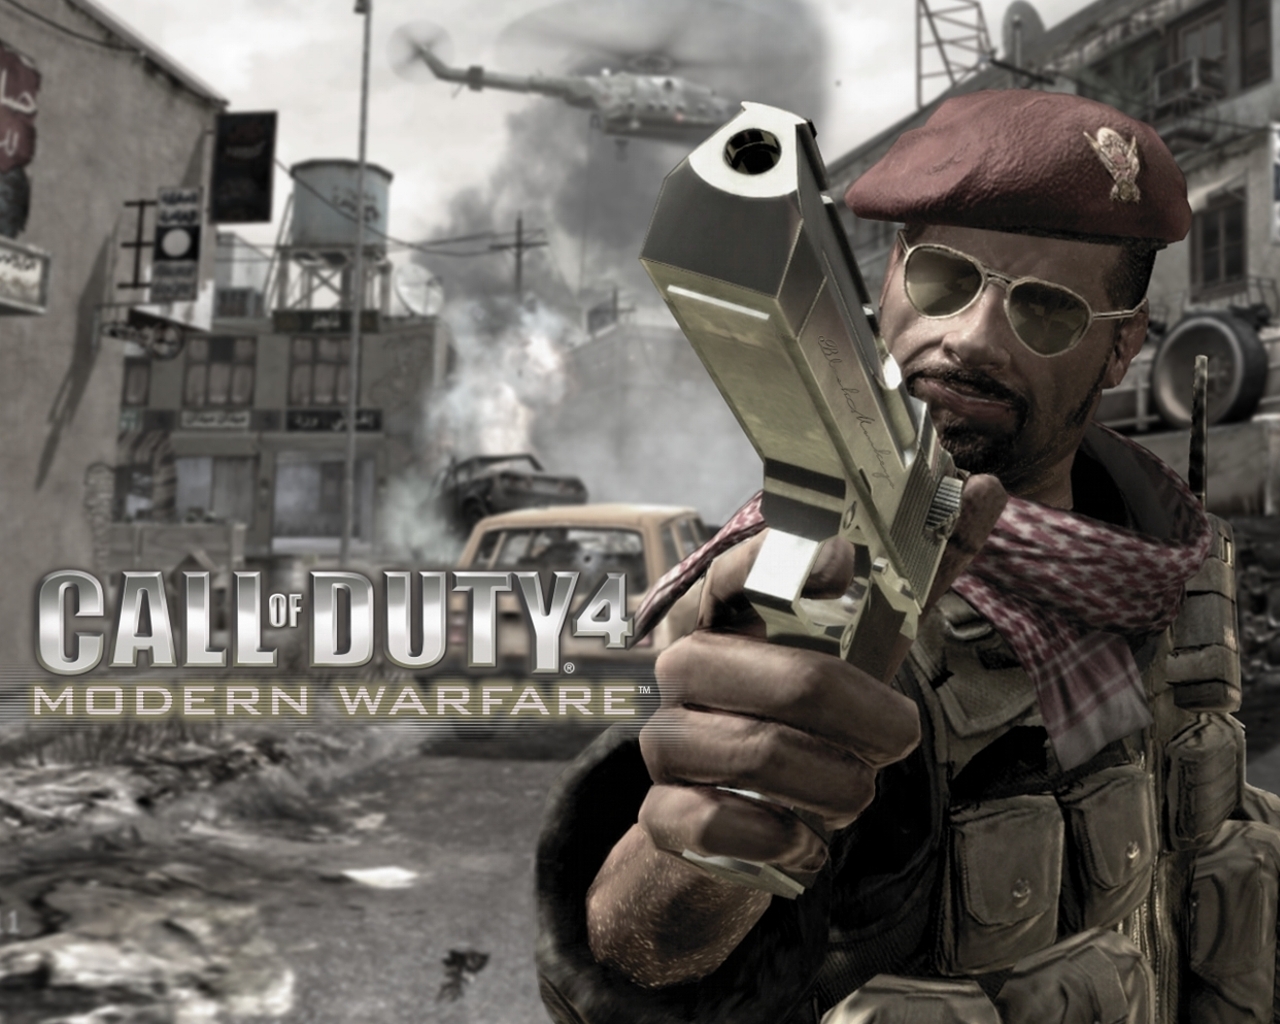 Dutch Fun Server: Auto Gallery : Gaming Wallpapers / Call of Duty ...